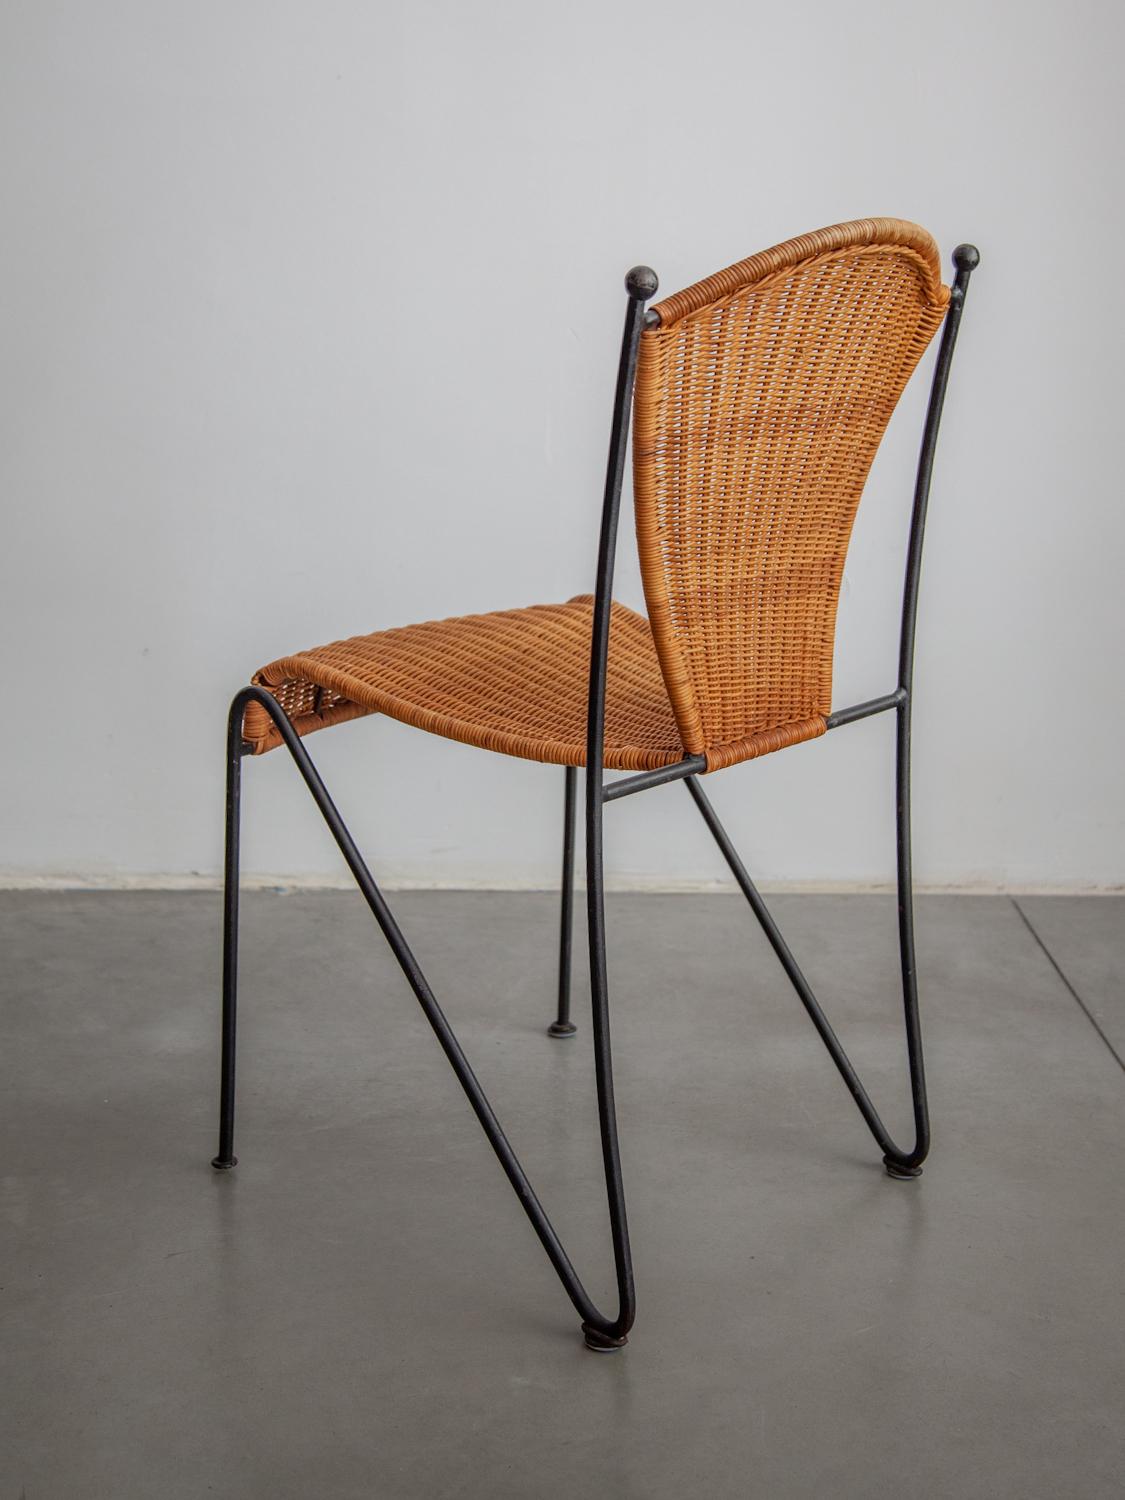 Six Iron and Rattan Indoor and Outdoor Patio Chairs by Pipsan Saarinen Swanson 4